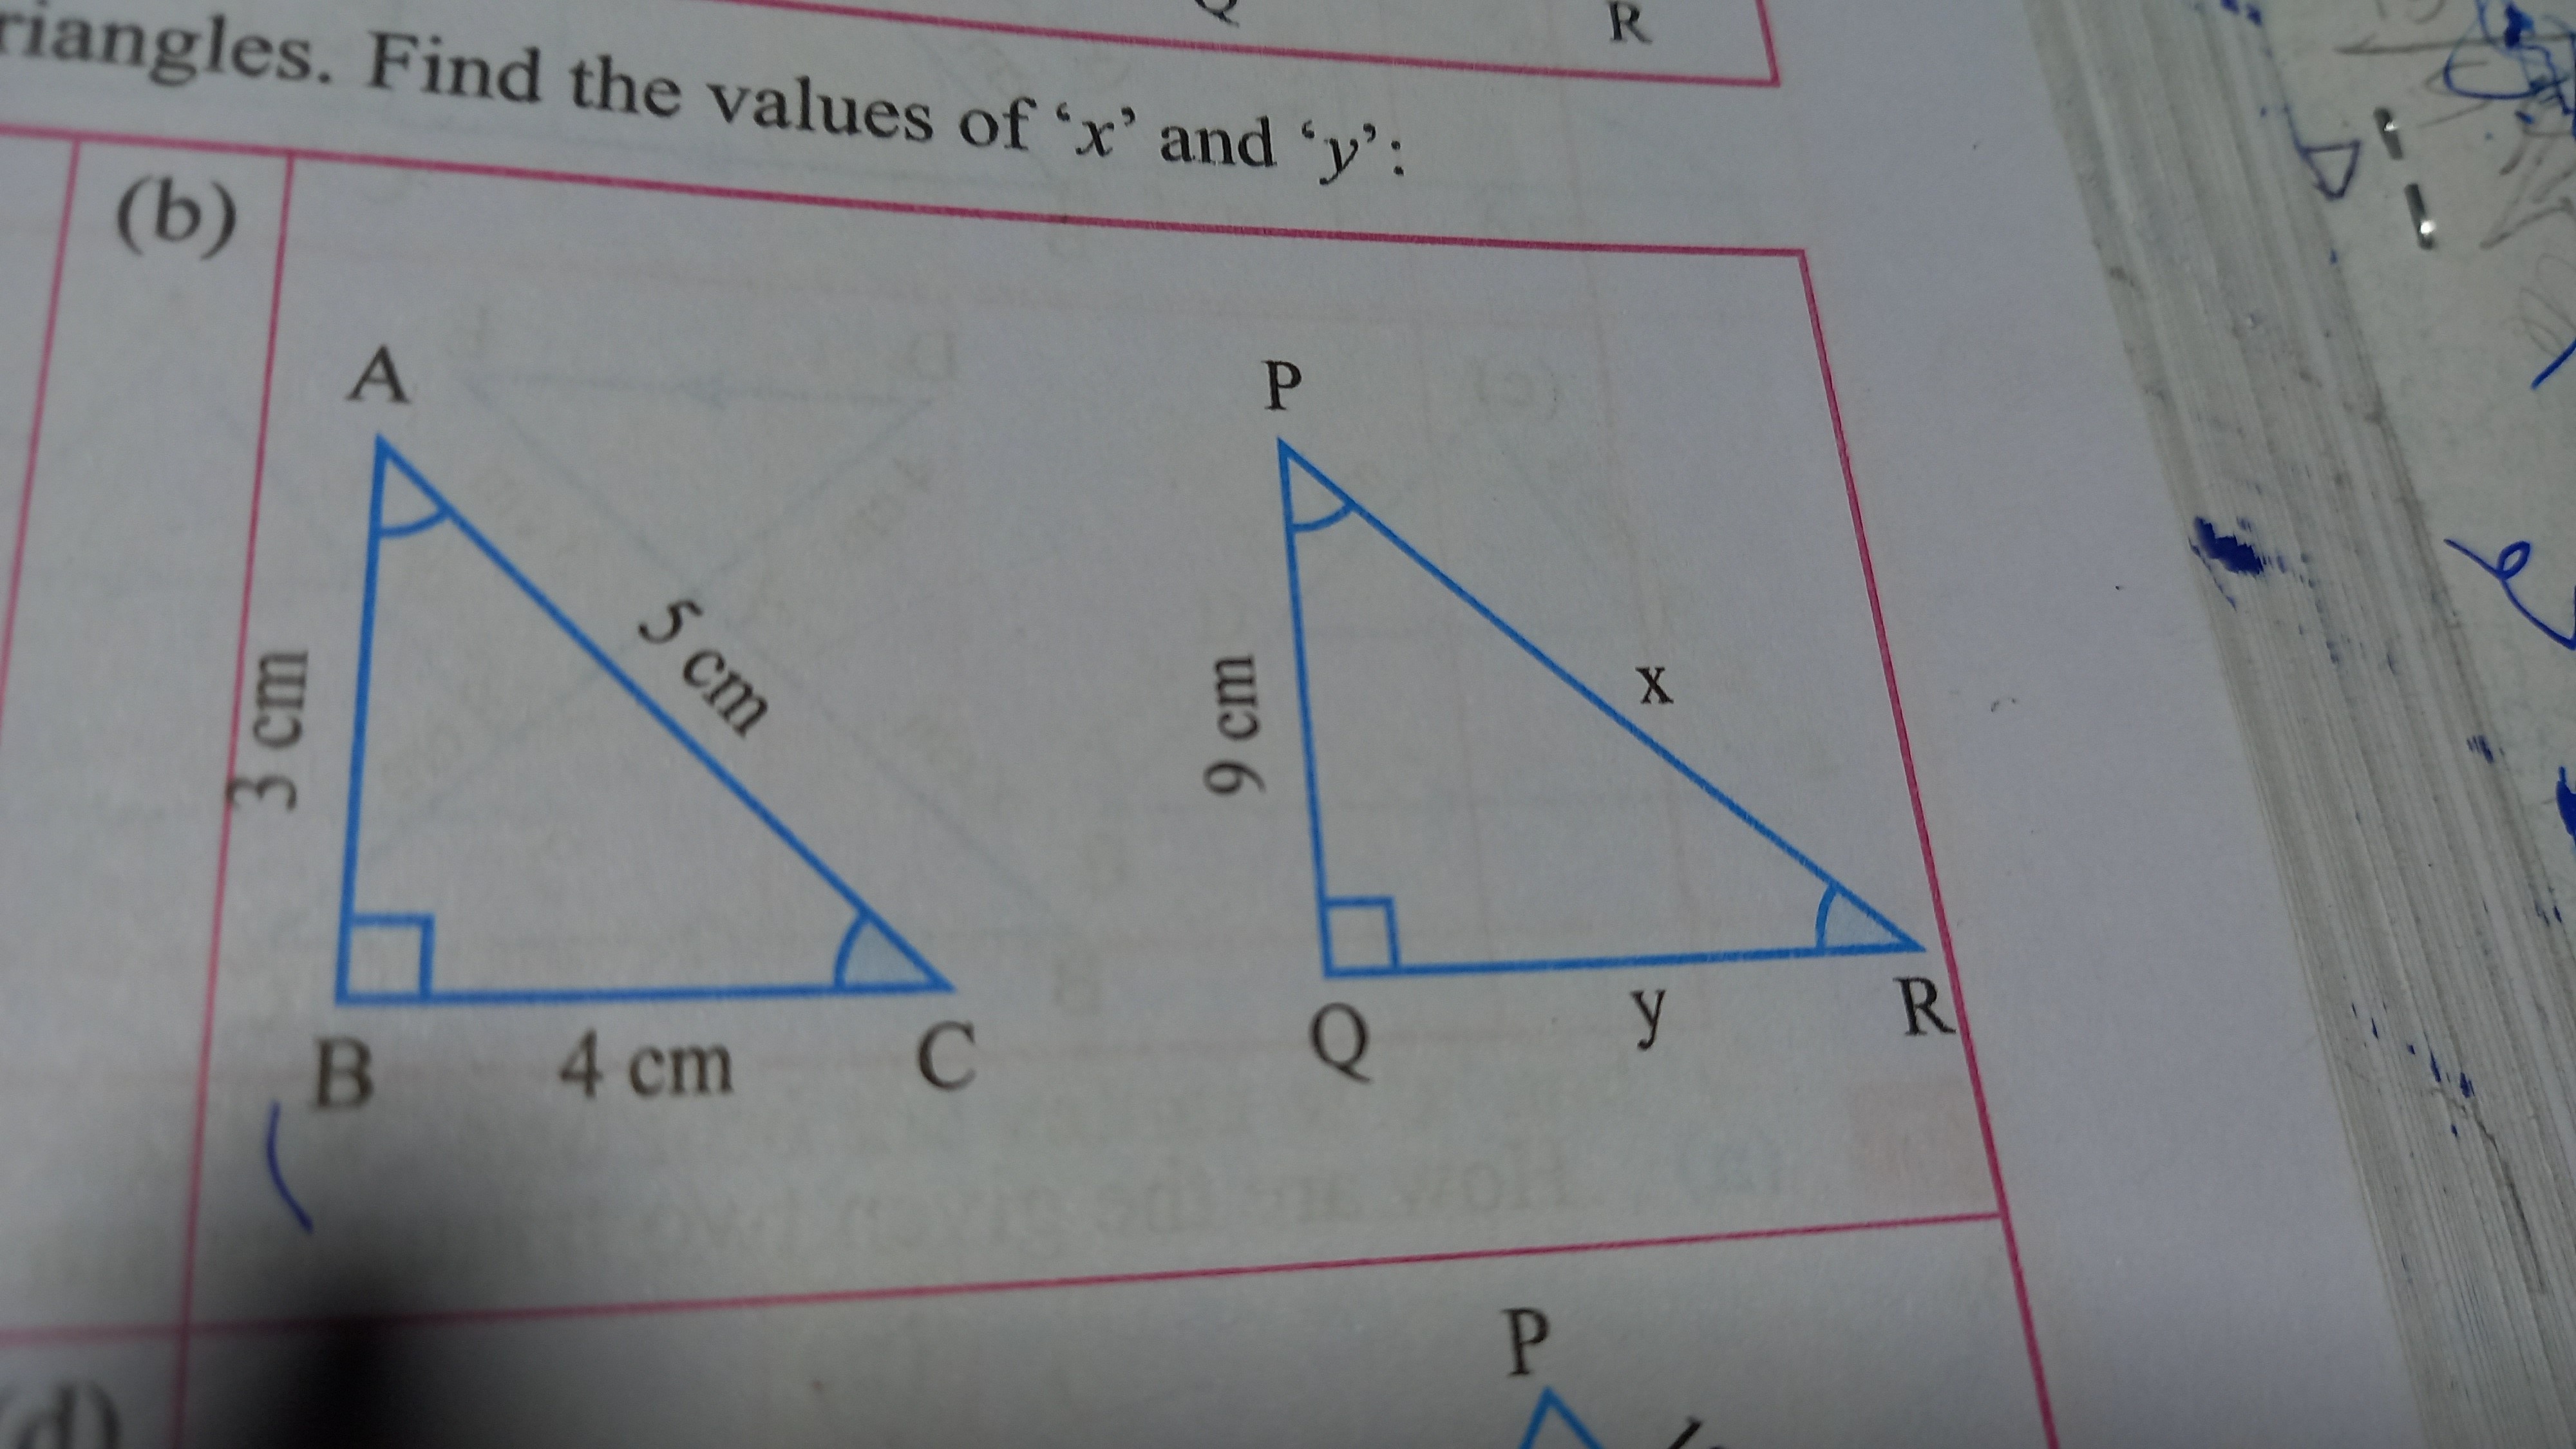 riangles. Find the values of ' x ' and ' y ':
(b)
